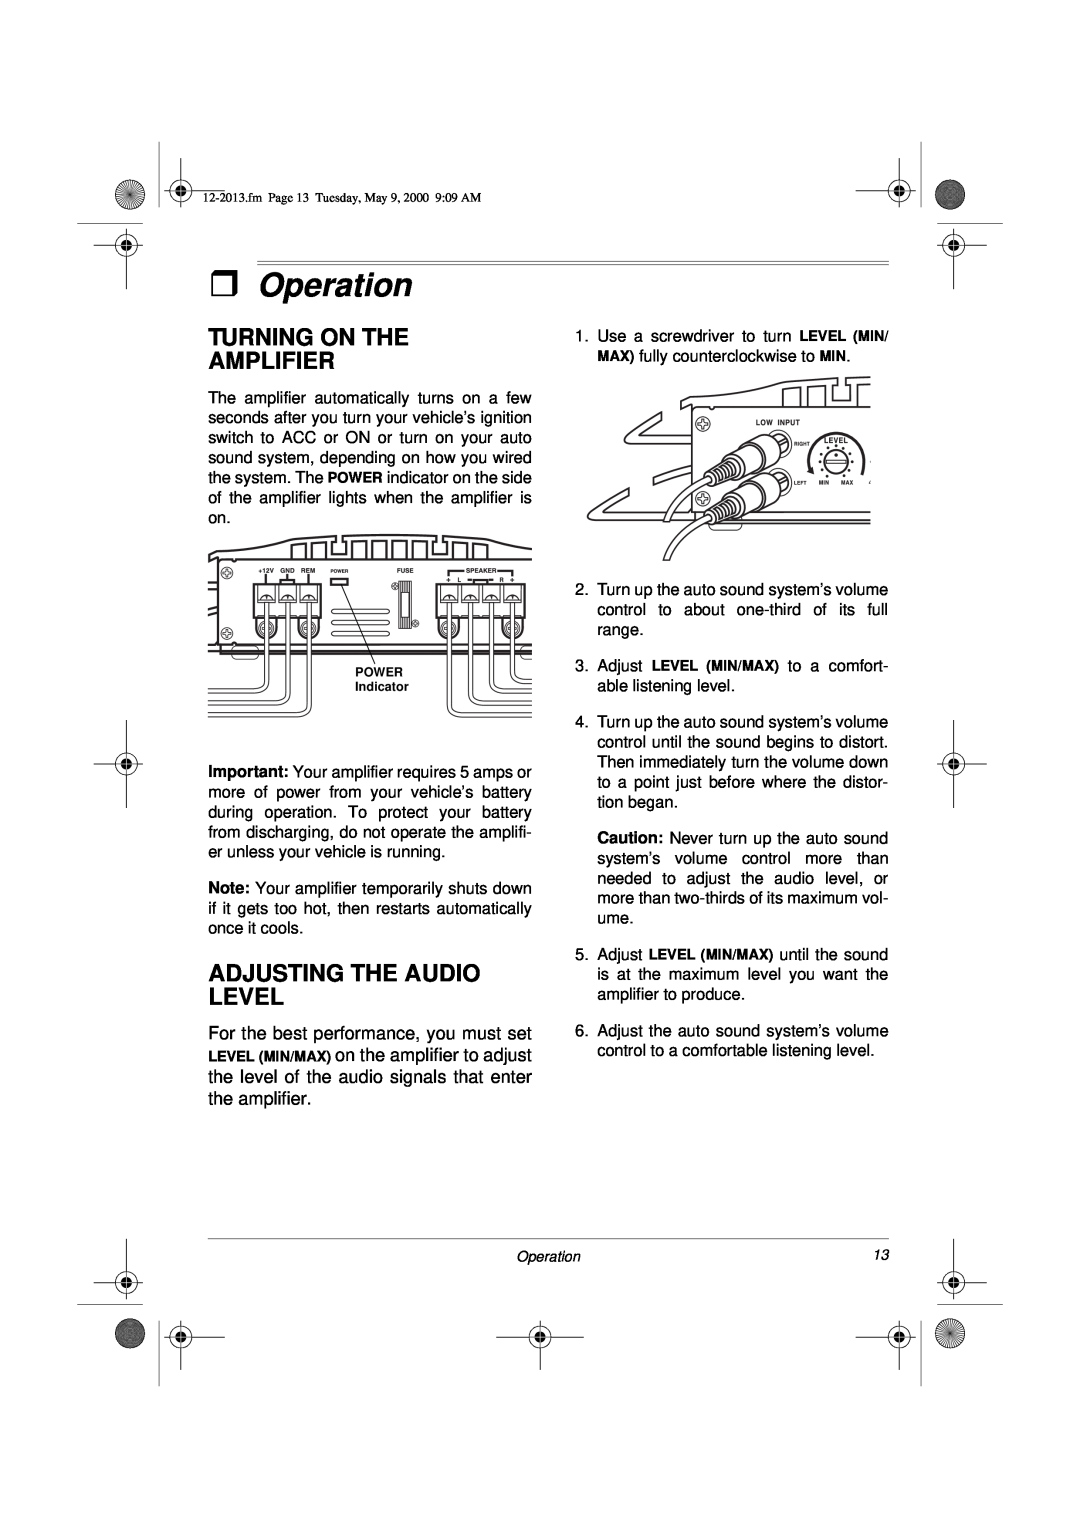 Radio Shack XL-50 owner manual ˆOperation, Turning On The Amplifier, Adjusting The Audio Level 